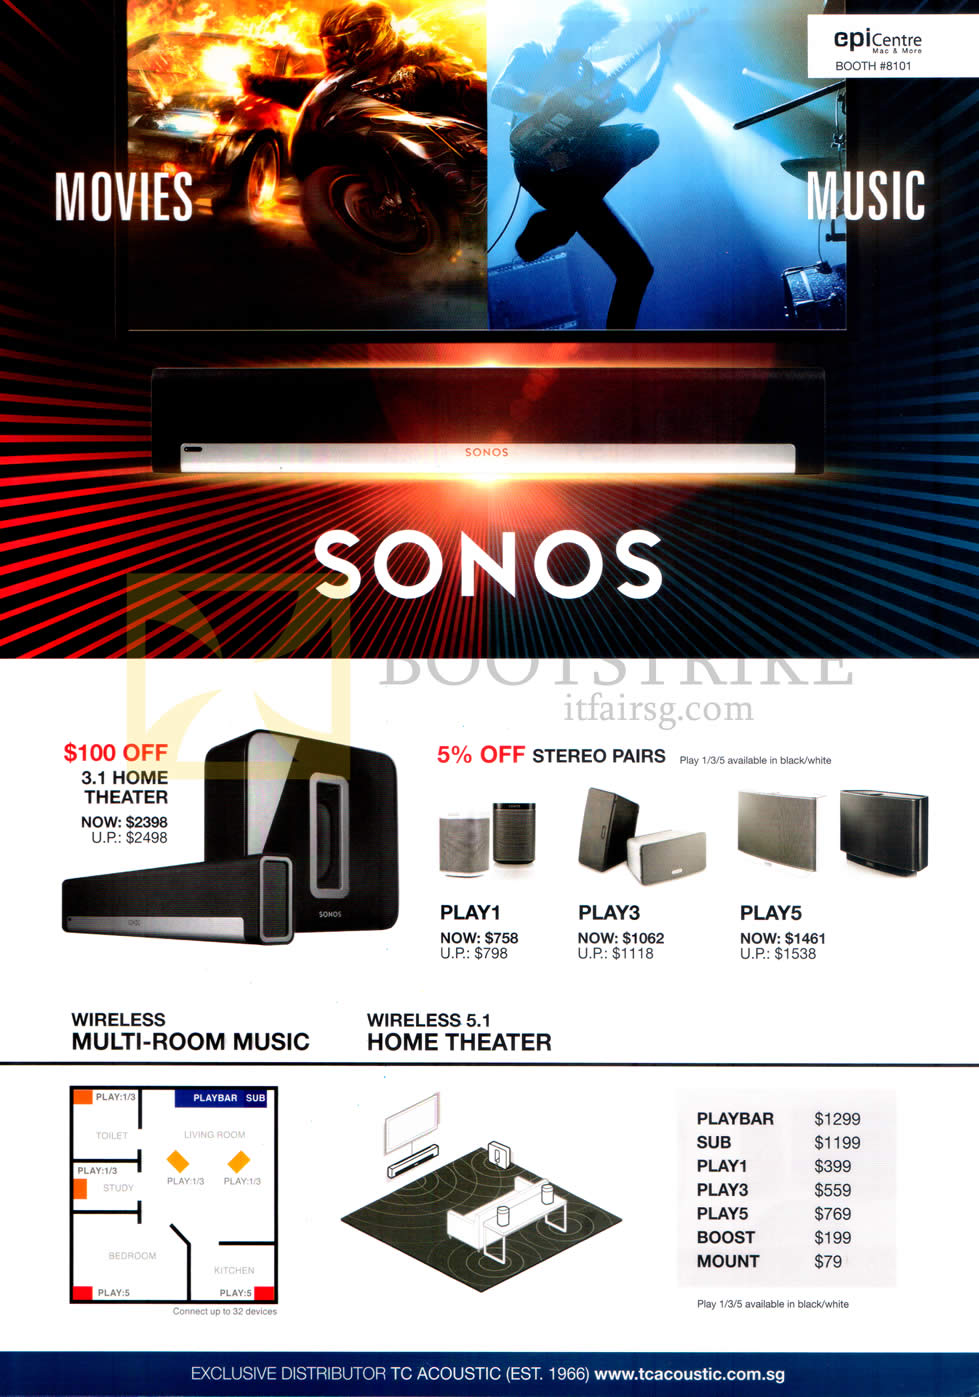 COMEX 2015 price list image brochure of EpiCentre Home Theatre Systems 3.1, Play 3, Wireless Multi-Room Music, Wireless 5.1 Home Theatre